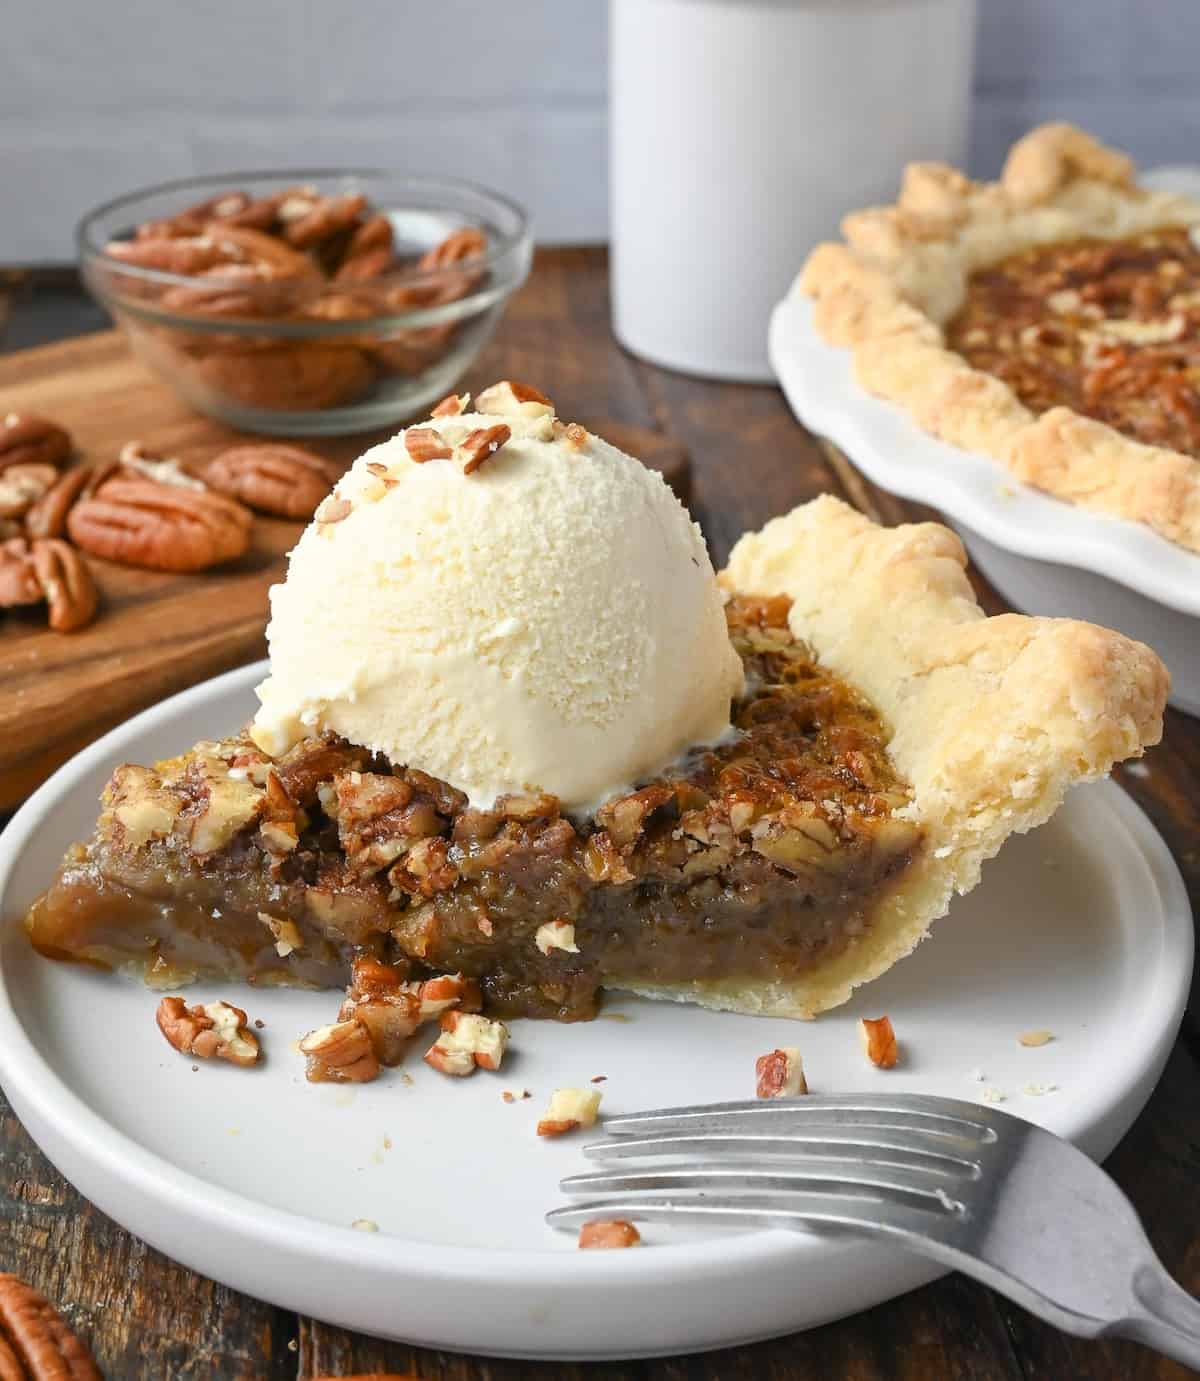 Maple pecan pie on a plate with vanilla ice cream and a fork.